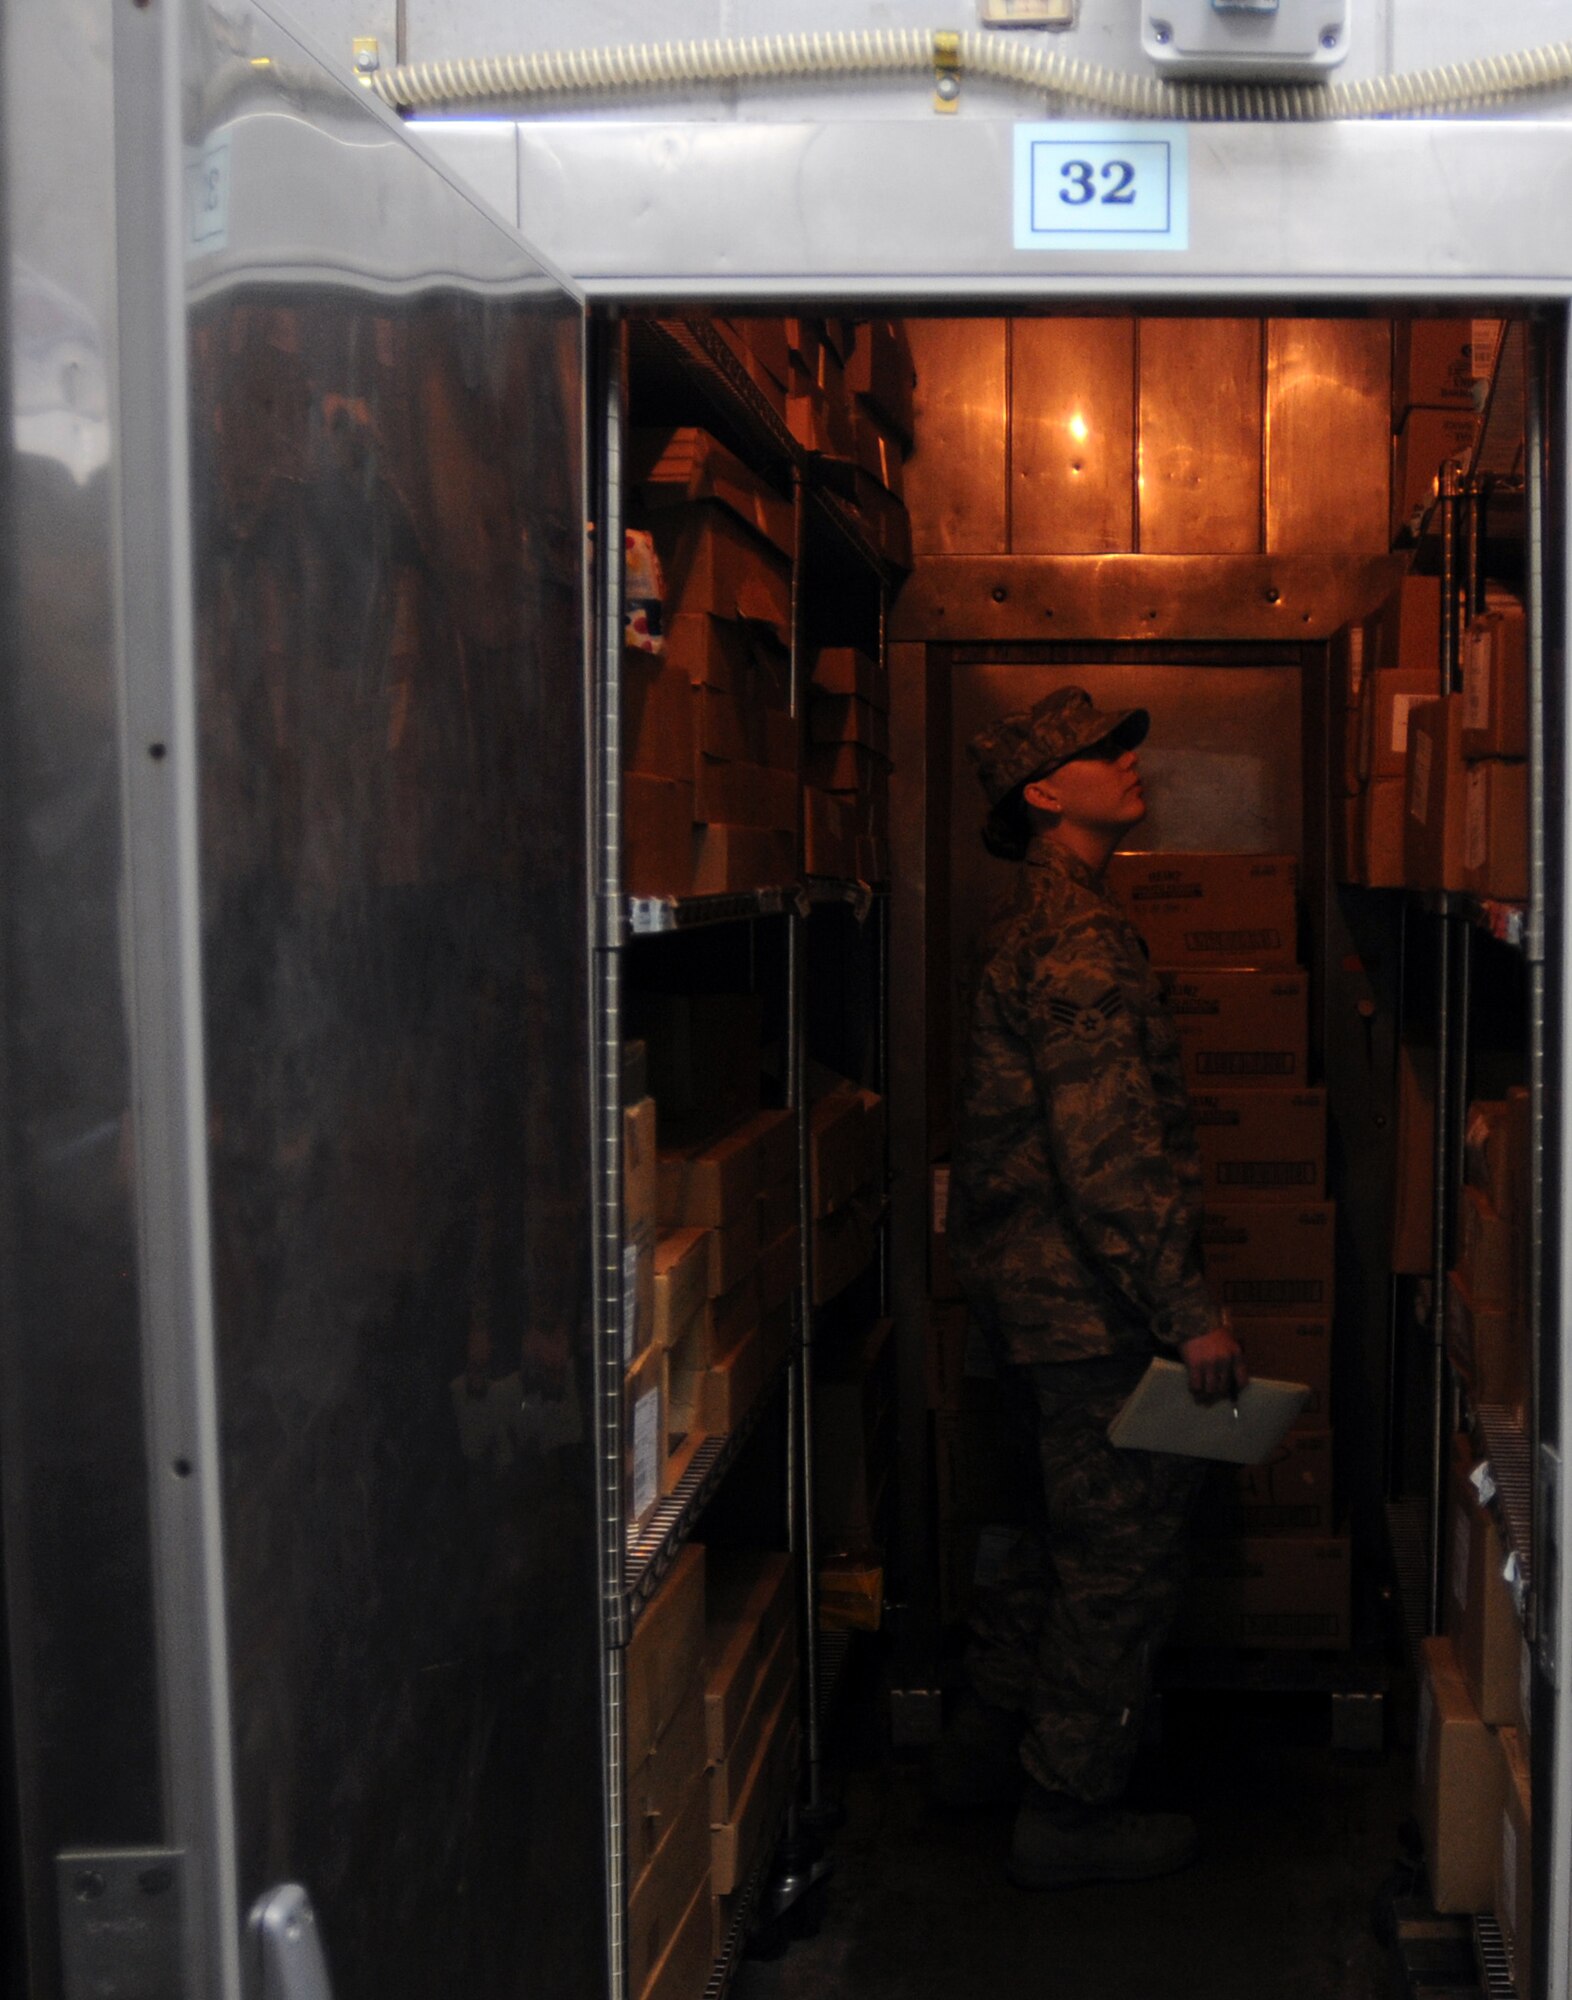 Senior Airman Christina Moran, 39th Medical Group Public Health technician, inspects a food storage room inside the Sultan’s Inn at Incirlik Air Base, Turkey. Public Health has an array of responsibilities when it comes to keeping the base healthy including inspecting all facilities that serve food on base, ensuring the readiness of deploying Airmen and educating the public about safe sex. (U.S. Air Force photo/Senior Airman Sara Csurilla)